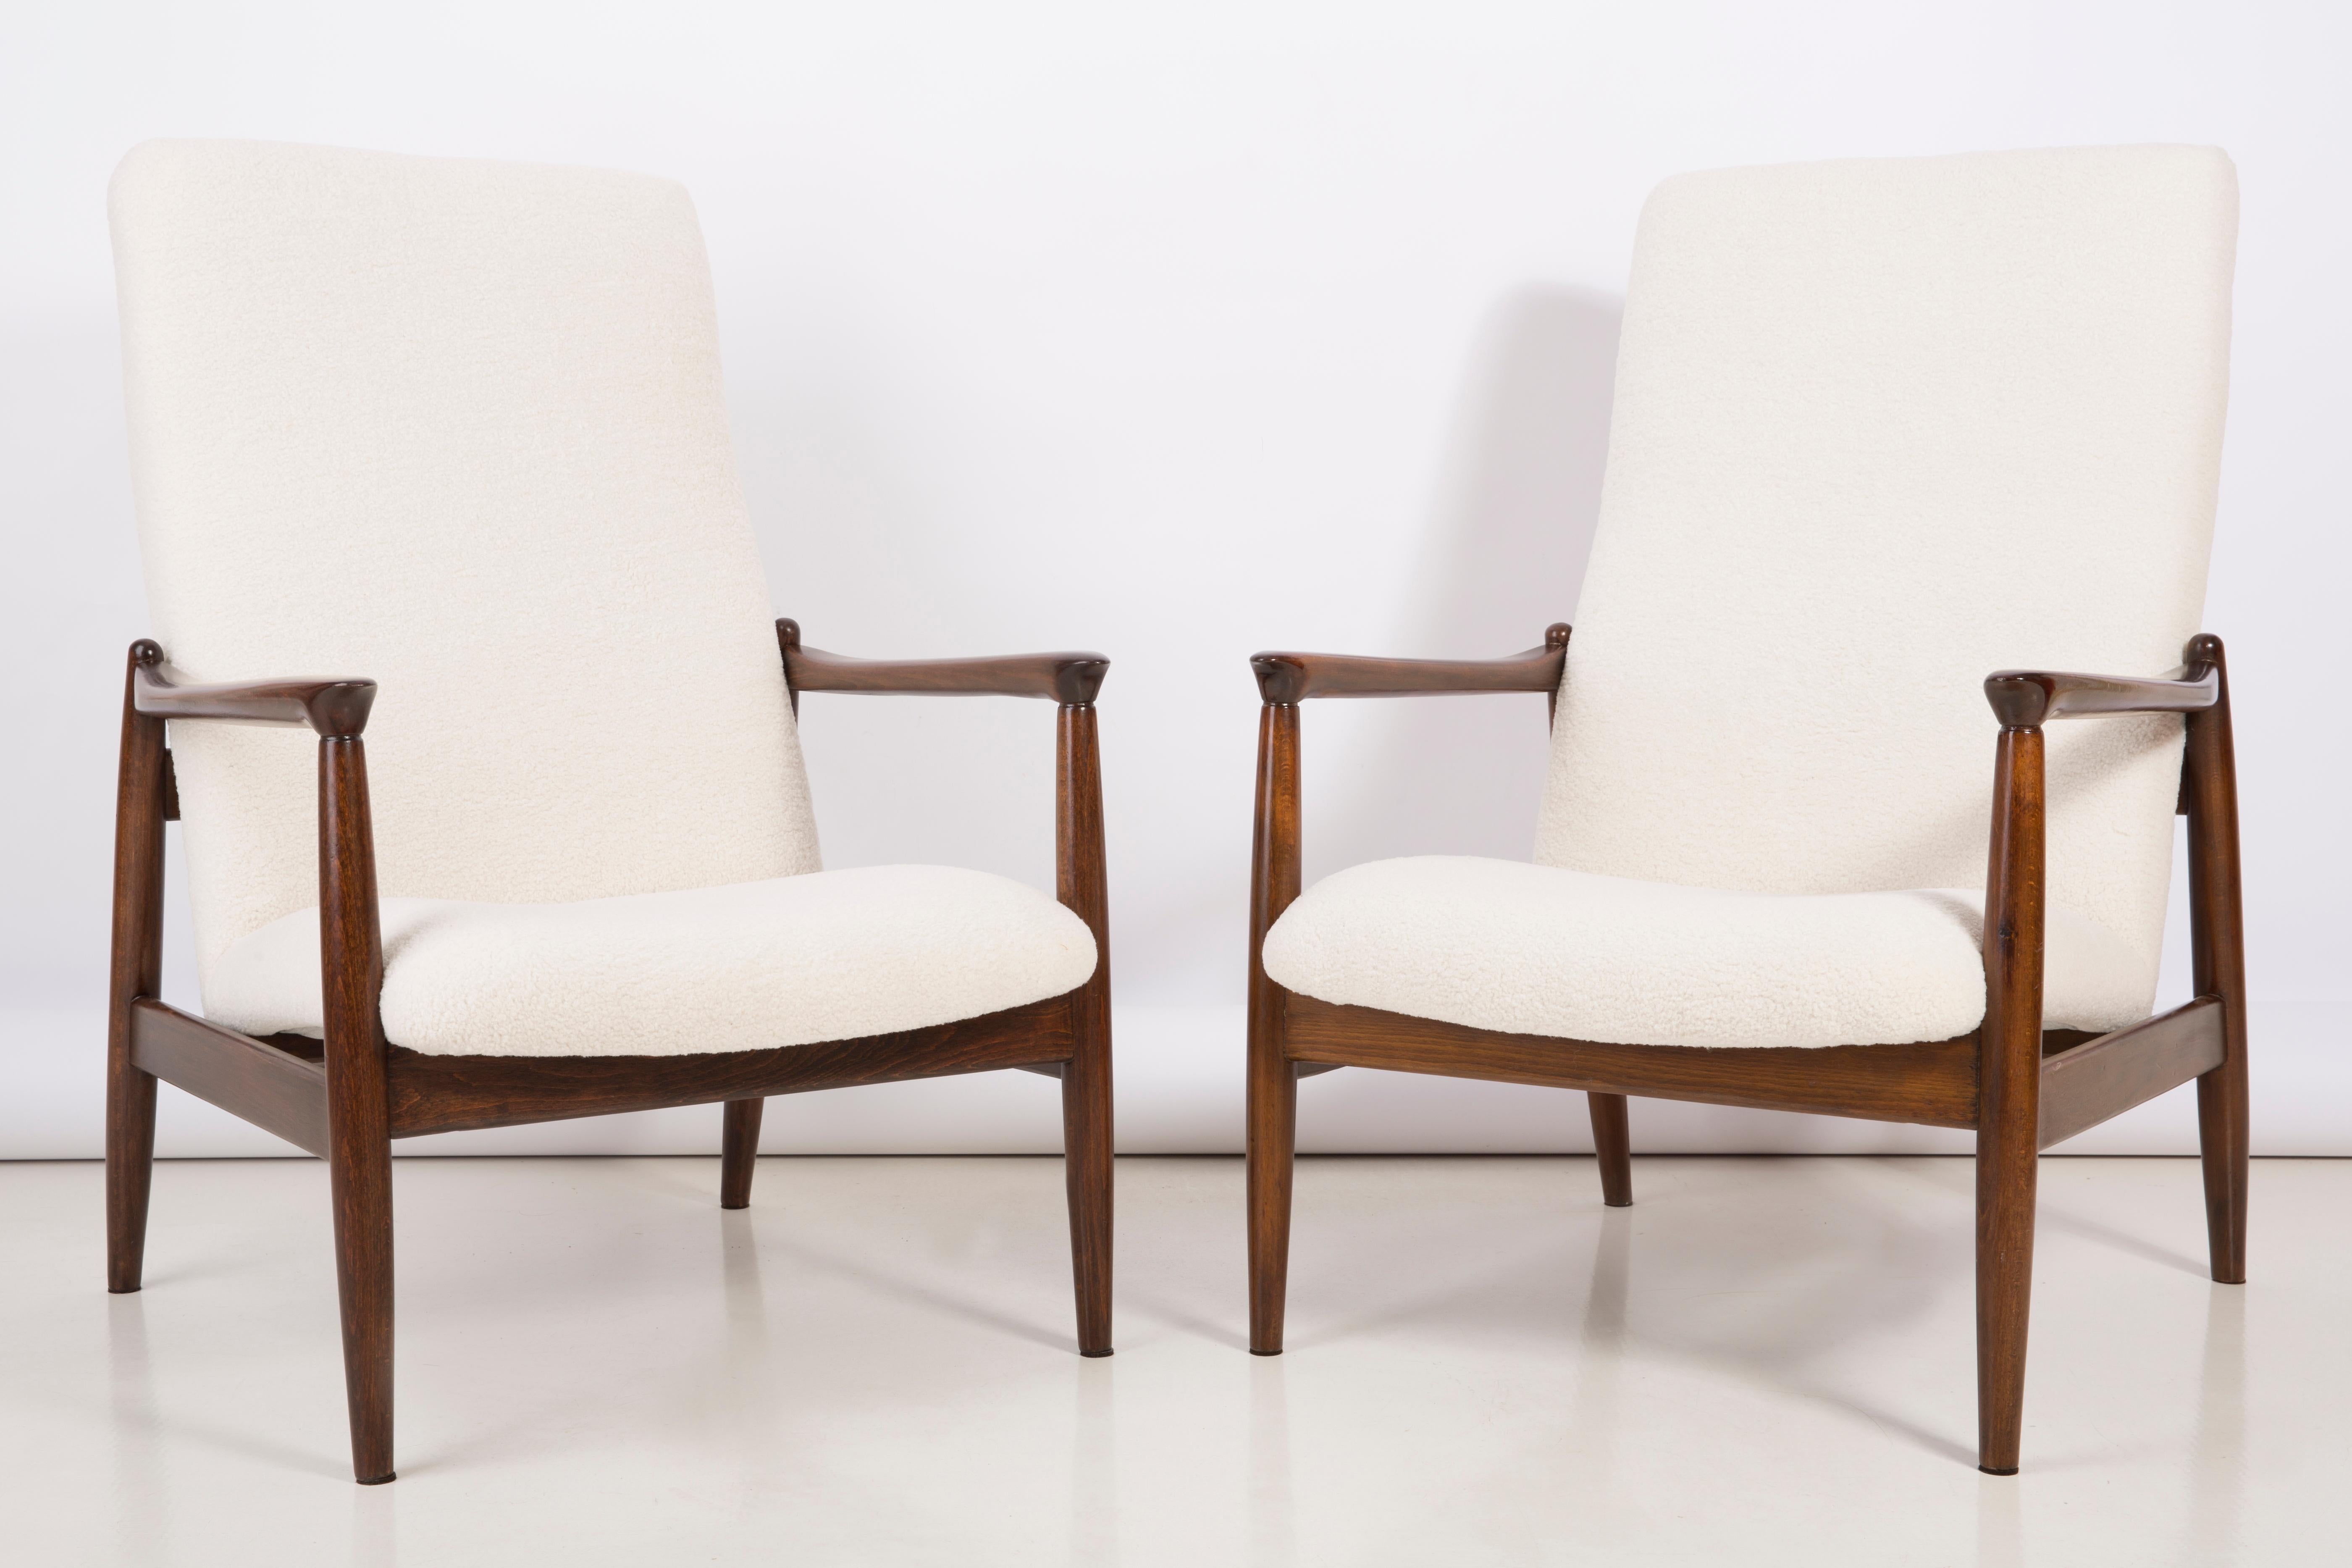 A pair of Light crème bouclé armchairs, designed by Edmund Homa, a Polish architect, designer of Industrial Design and interior architecture, professor at the Academy of Fine Arts in Gdansk.

The armchairs were made in the 1960s in the